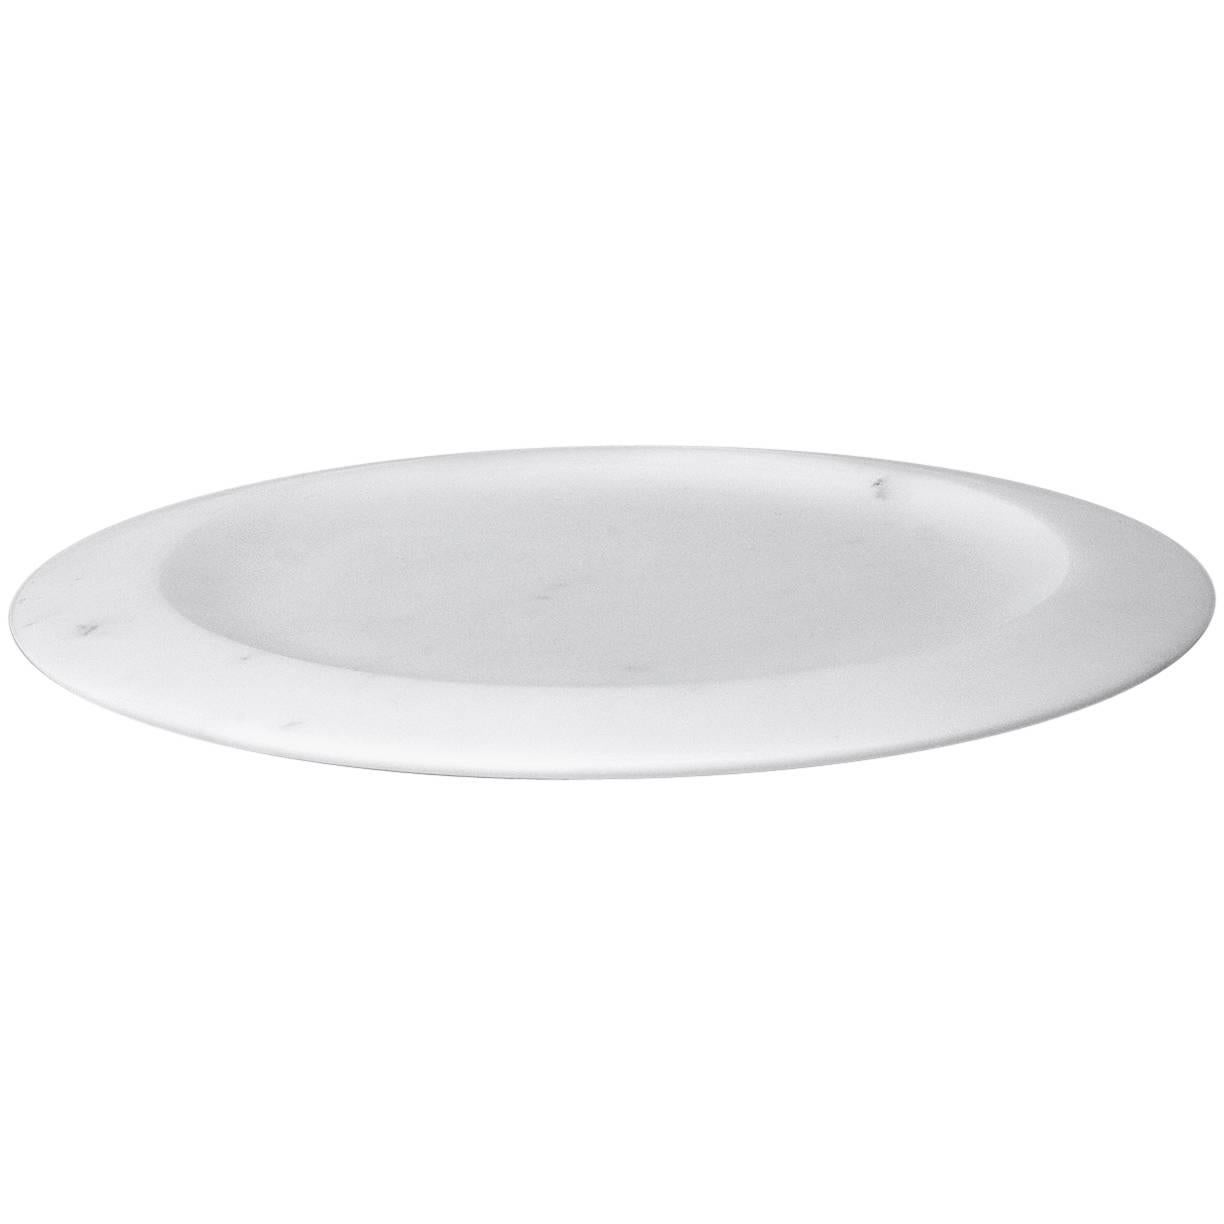 New Modern Dish in White Carrara Marble, creator Ivan Colominas For Sale